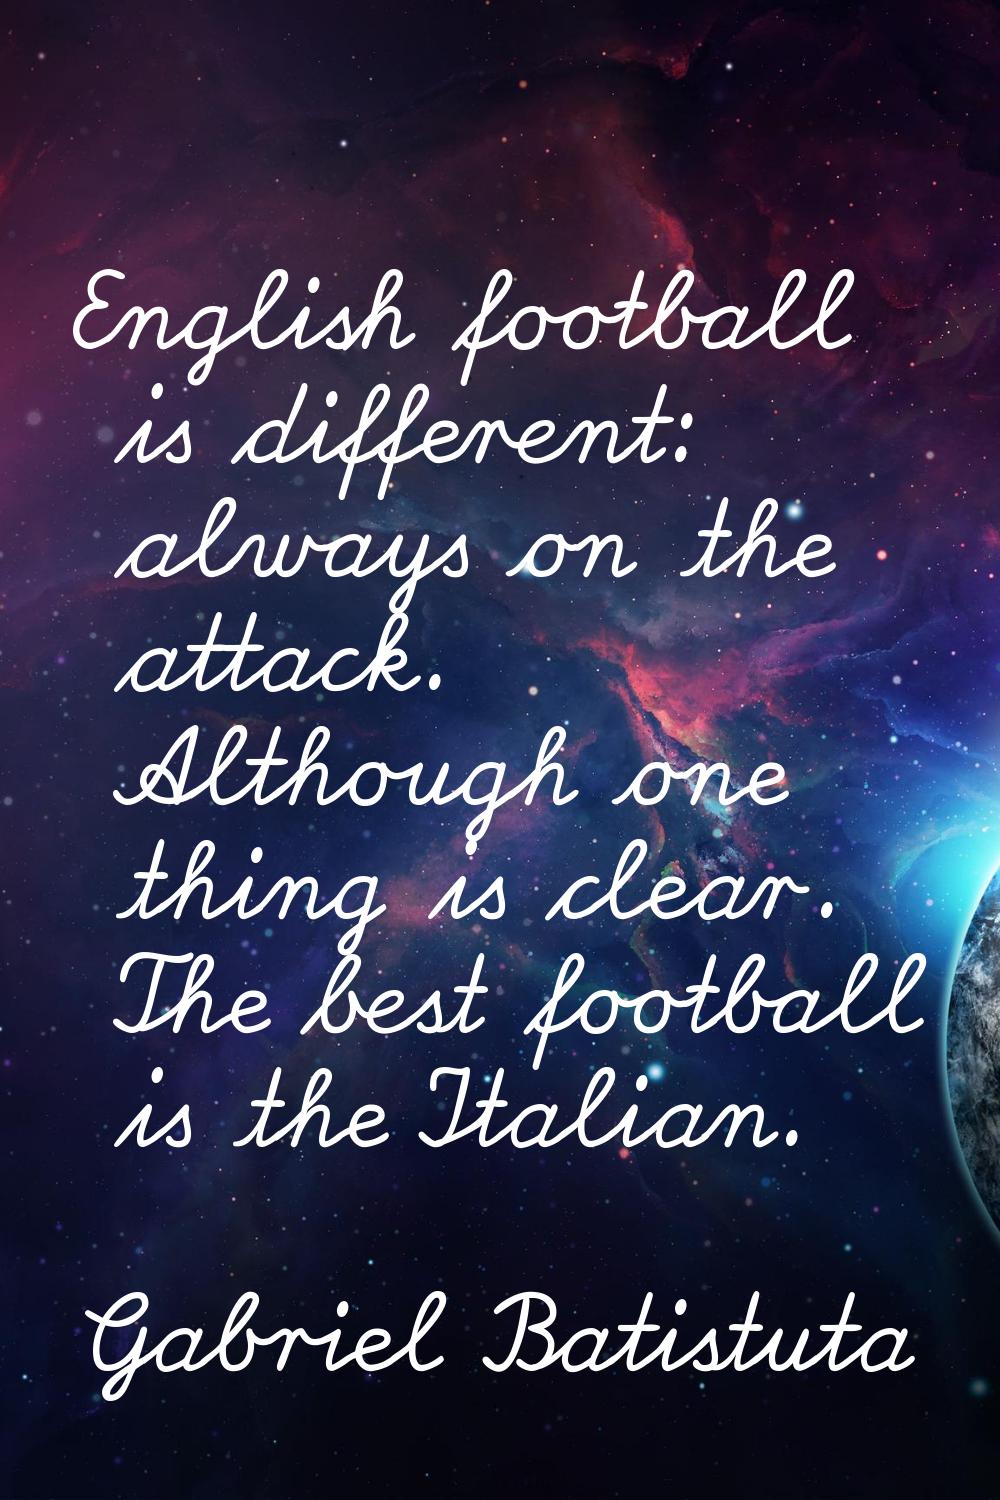 English football is different: always on the attack. Although one thing is clear. The best football